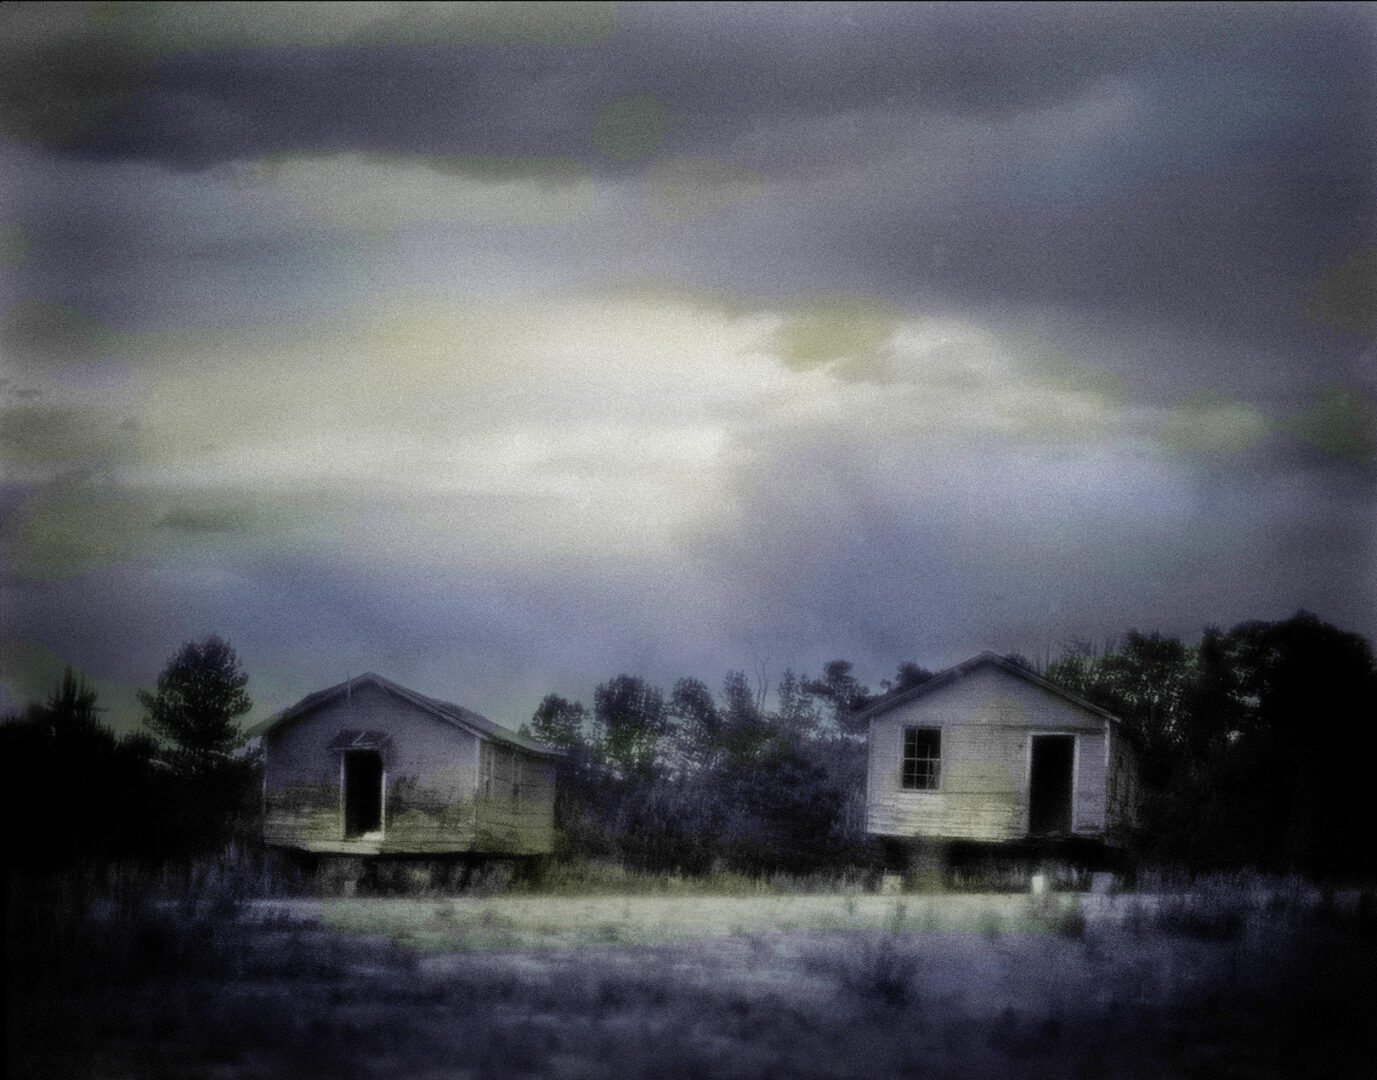 A painting of two houses in the middle of nowhere